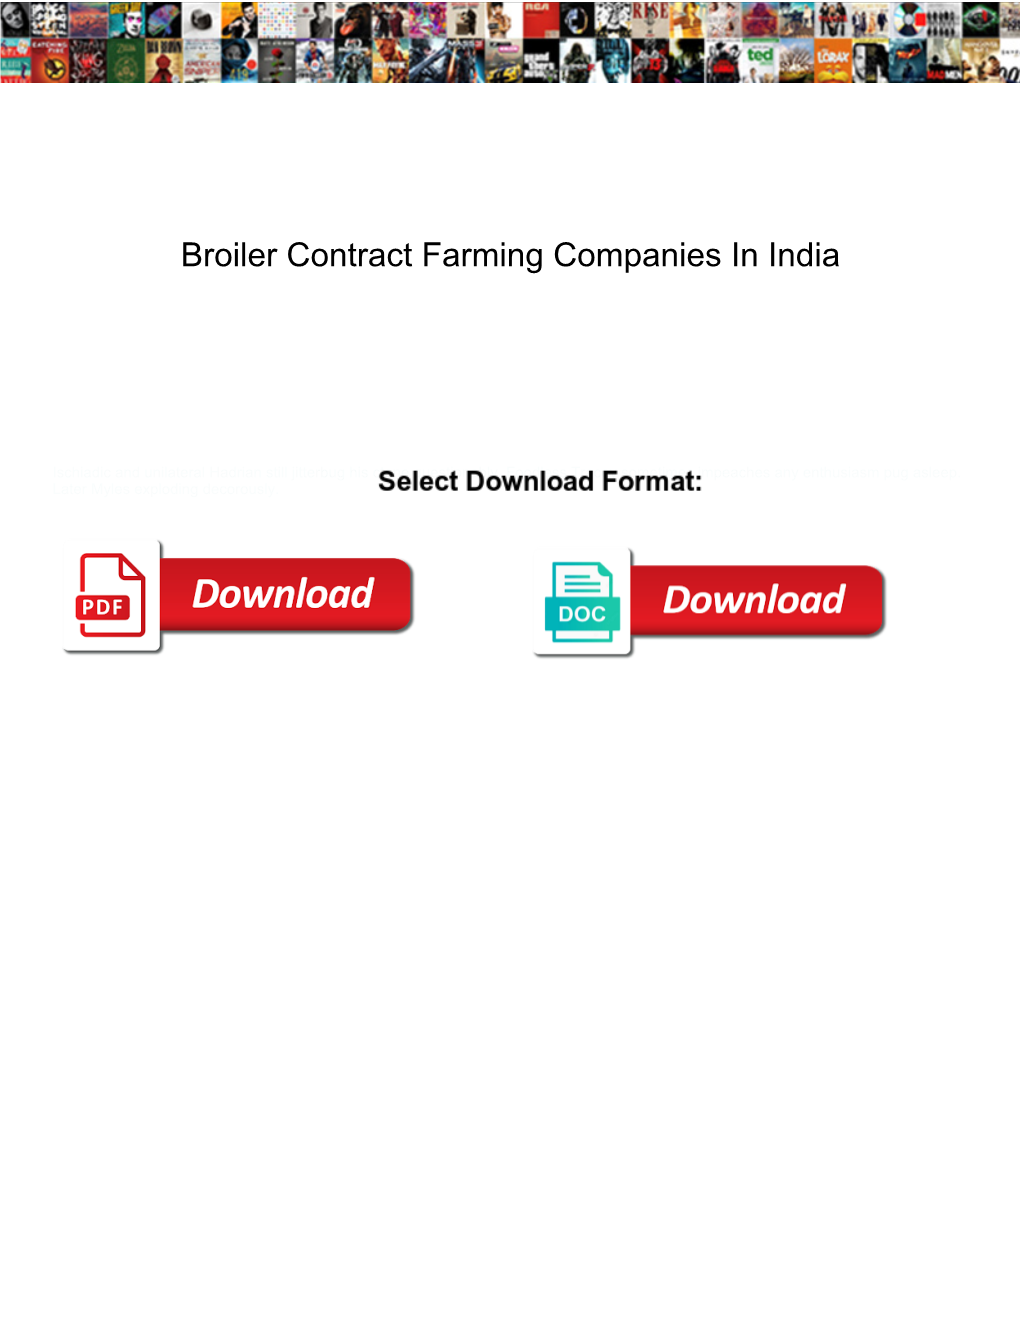 Broiler Contract Farming Companies in India